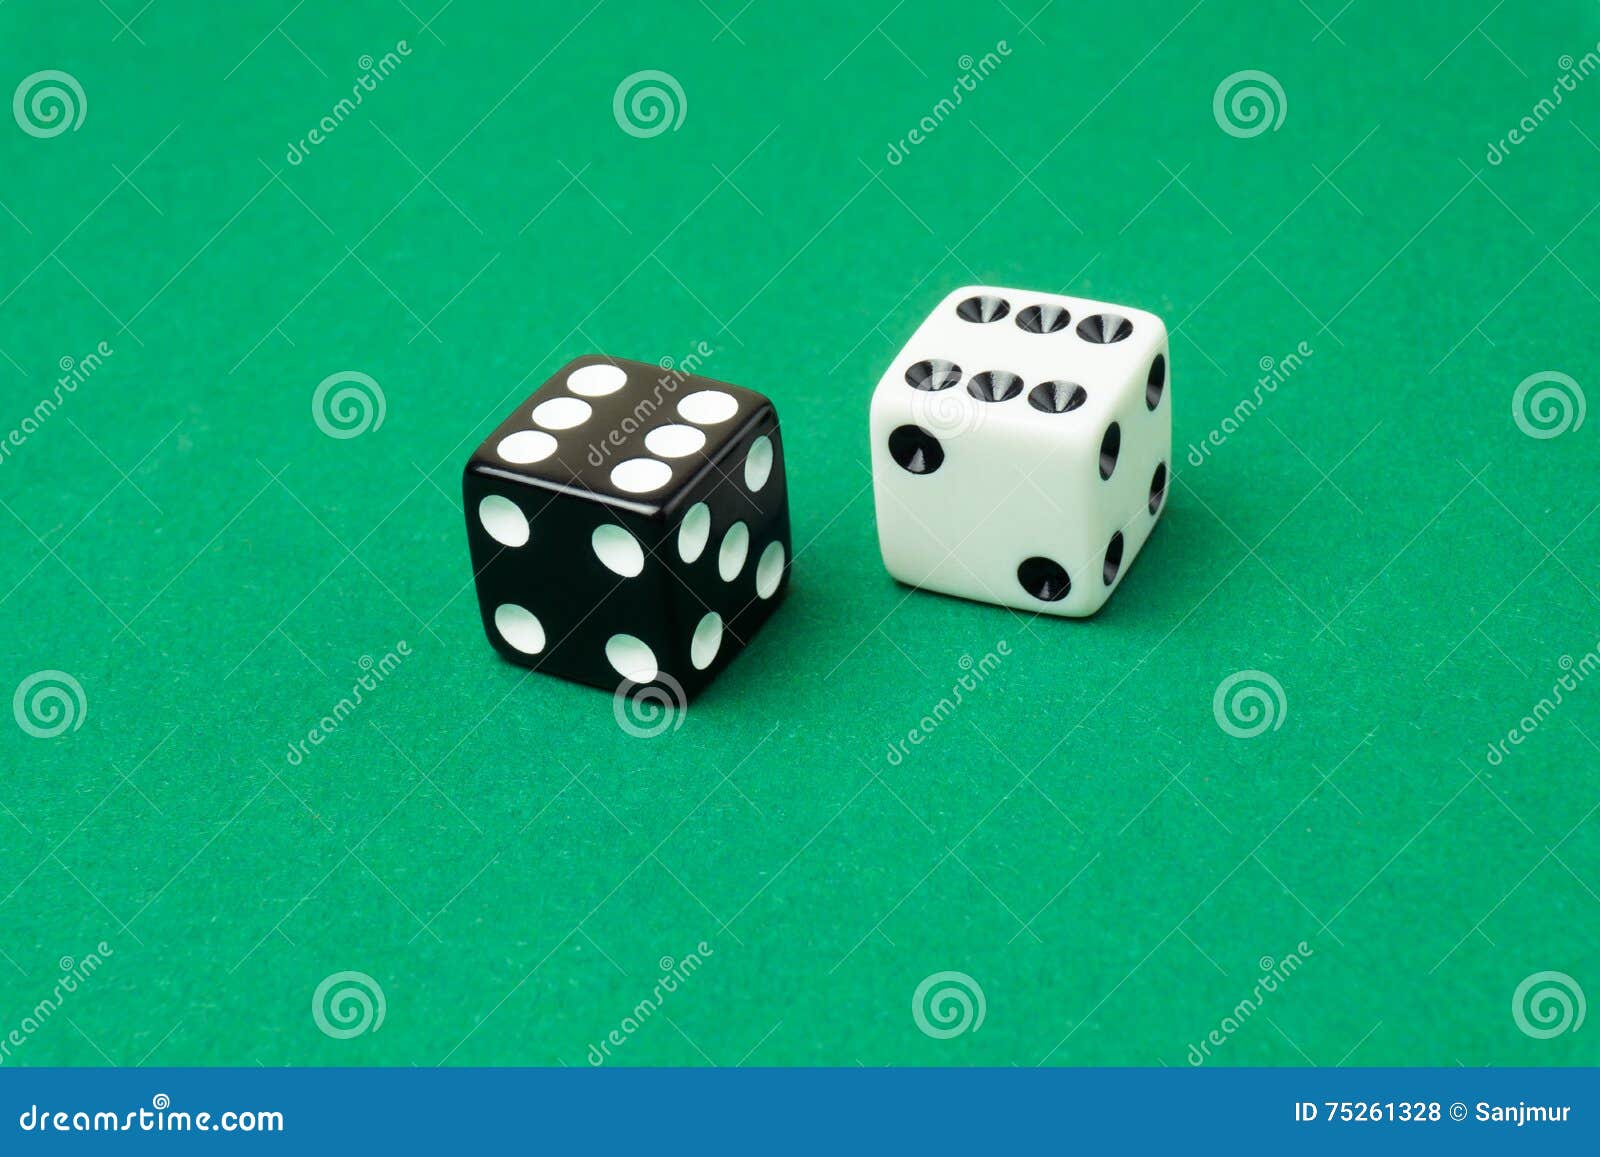 highest roll of two six sided dice